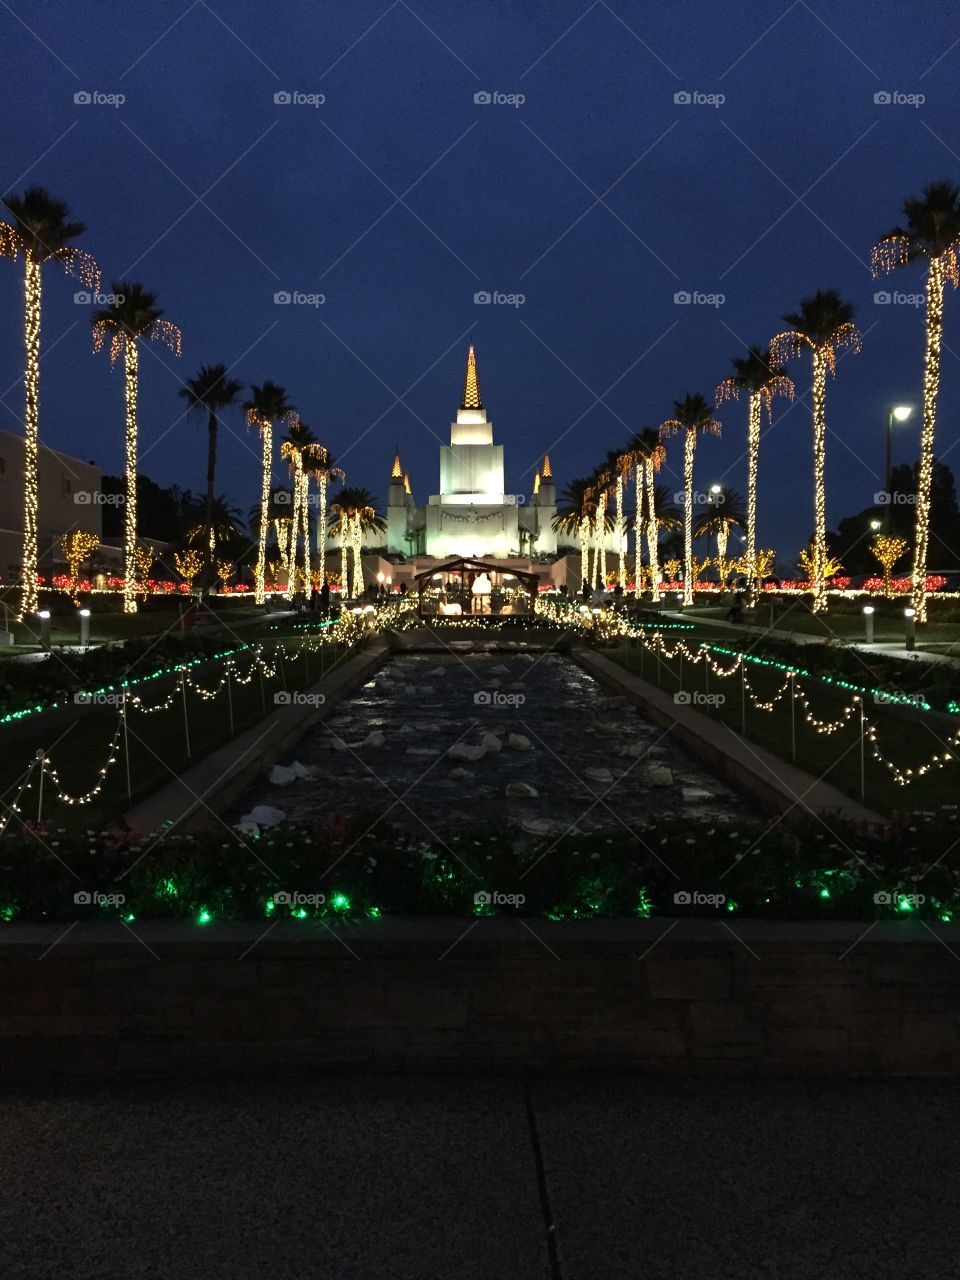 Oakland Temple during the holidays. 